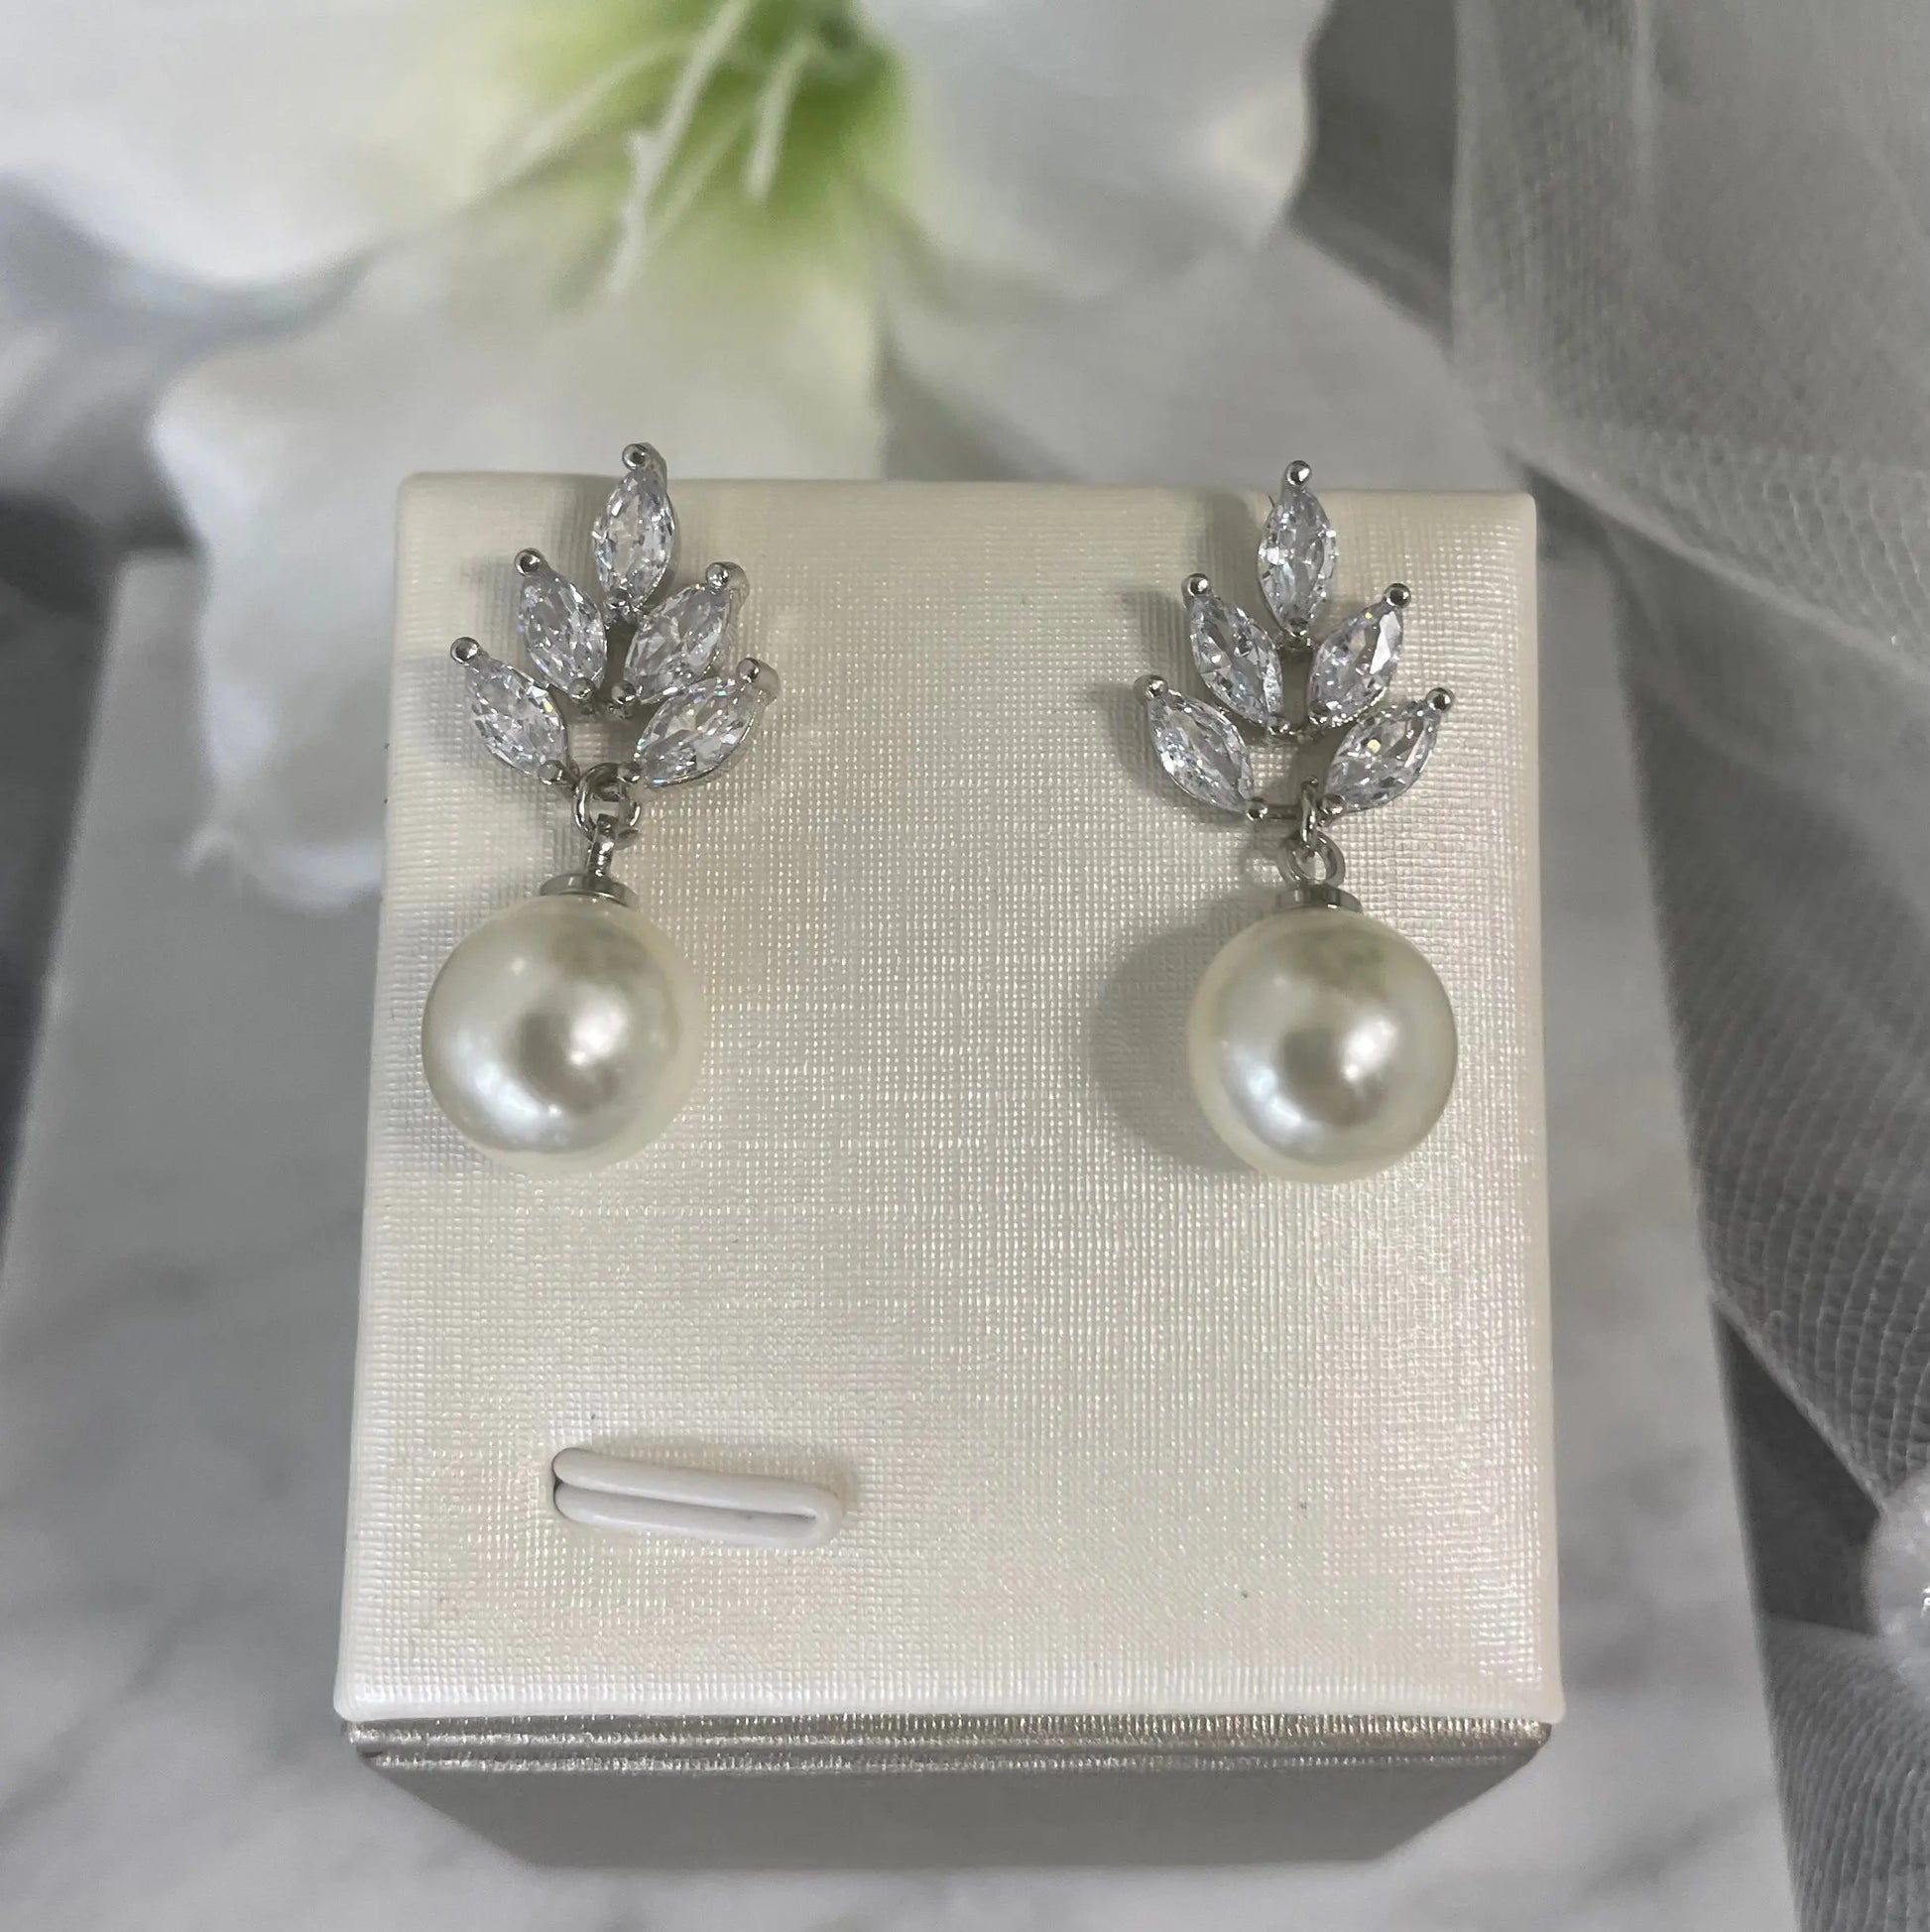 Earrings in Silver: Sophisticated silver earrings with a leaf design and dangling teardrop pearls.